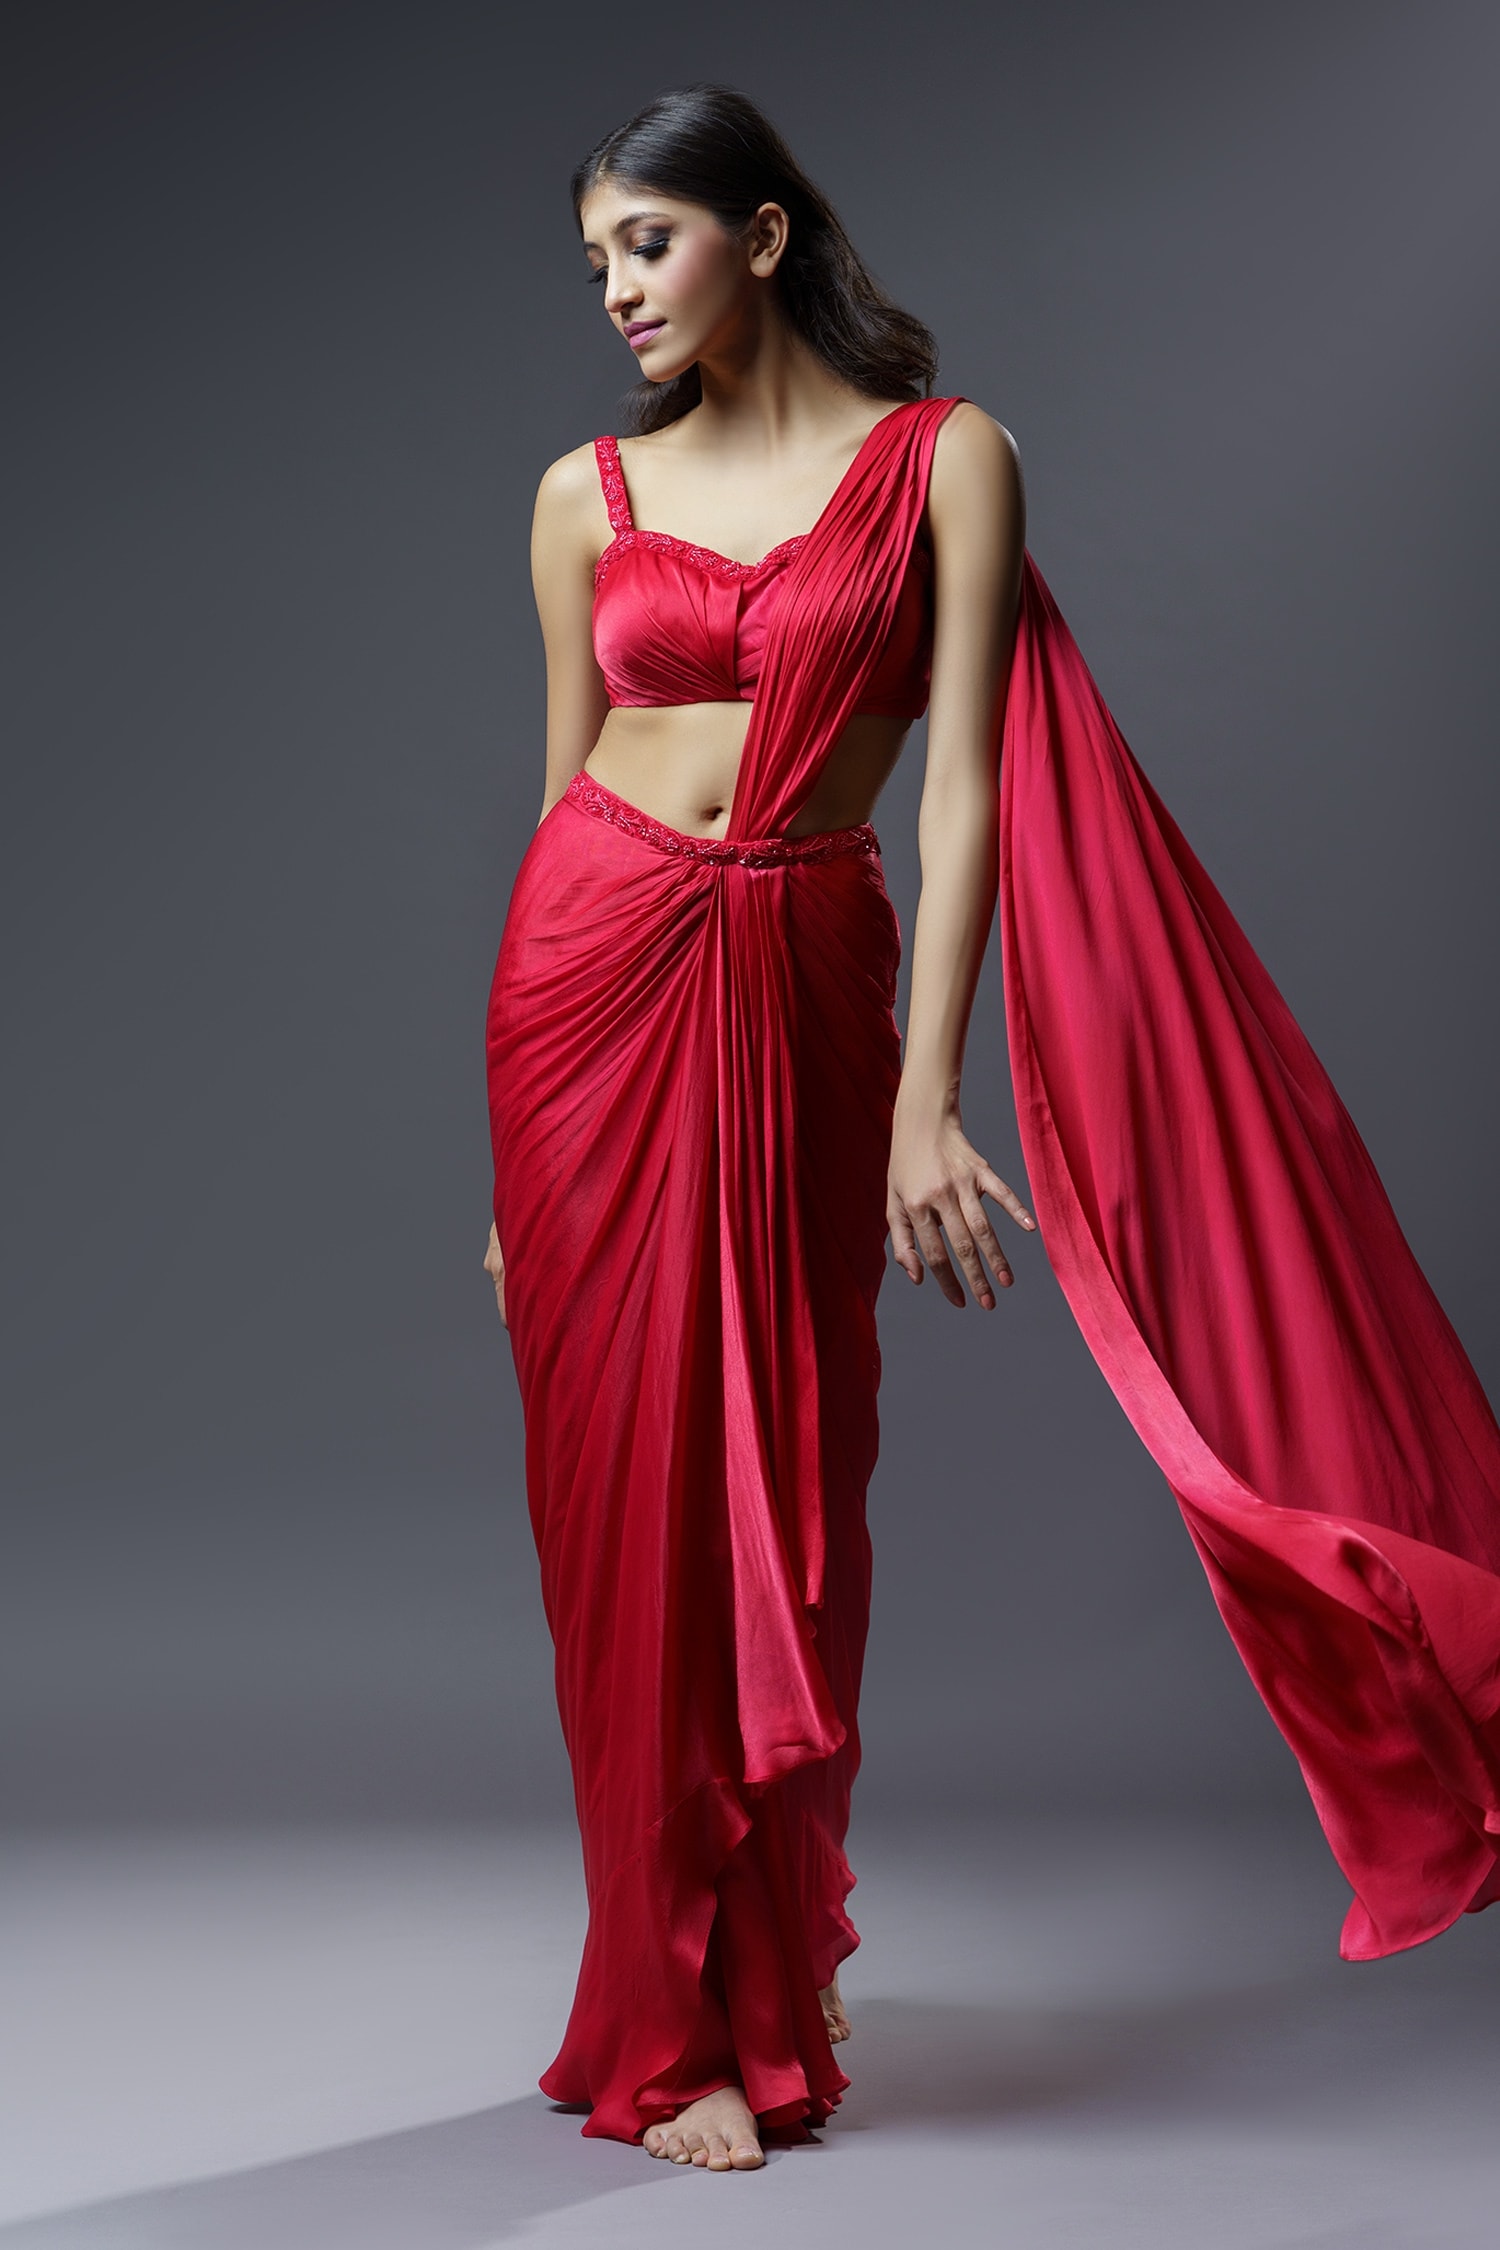 Beautiful Satin Draped Dresses in Saree style | Gown dress design, Wedding  blouse designs, Indian fashion dresses